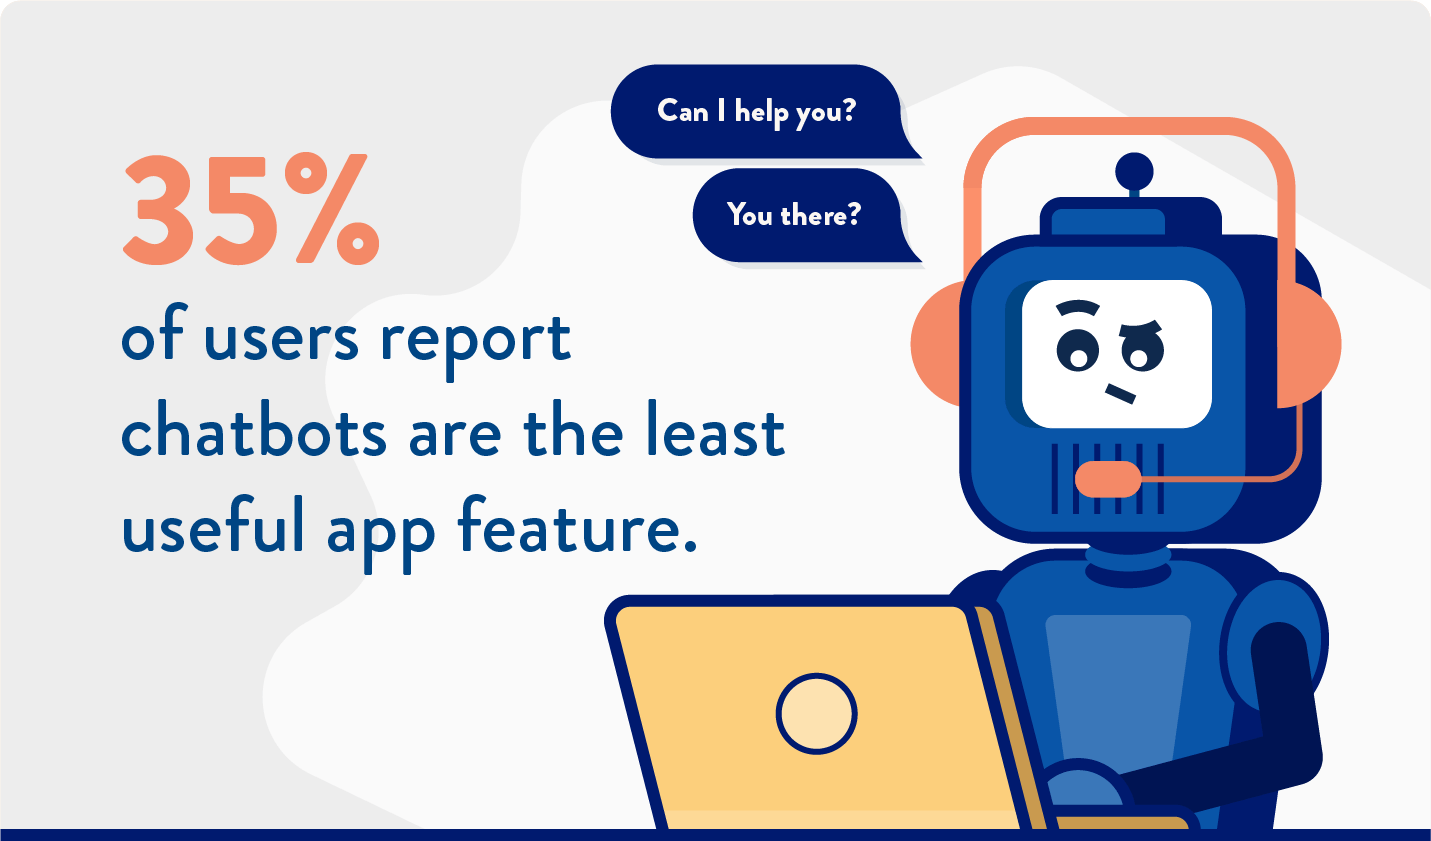 chatbots the least useful app feature reported by Americans in a survey 